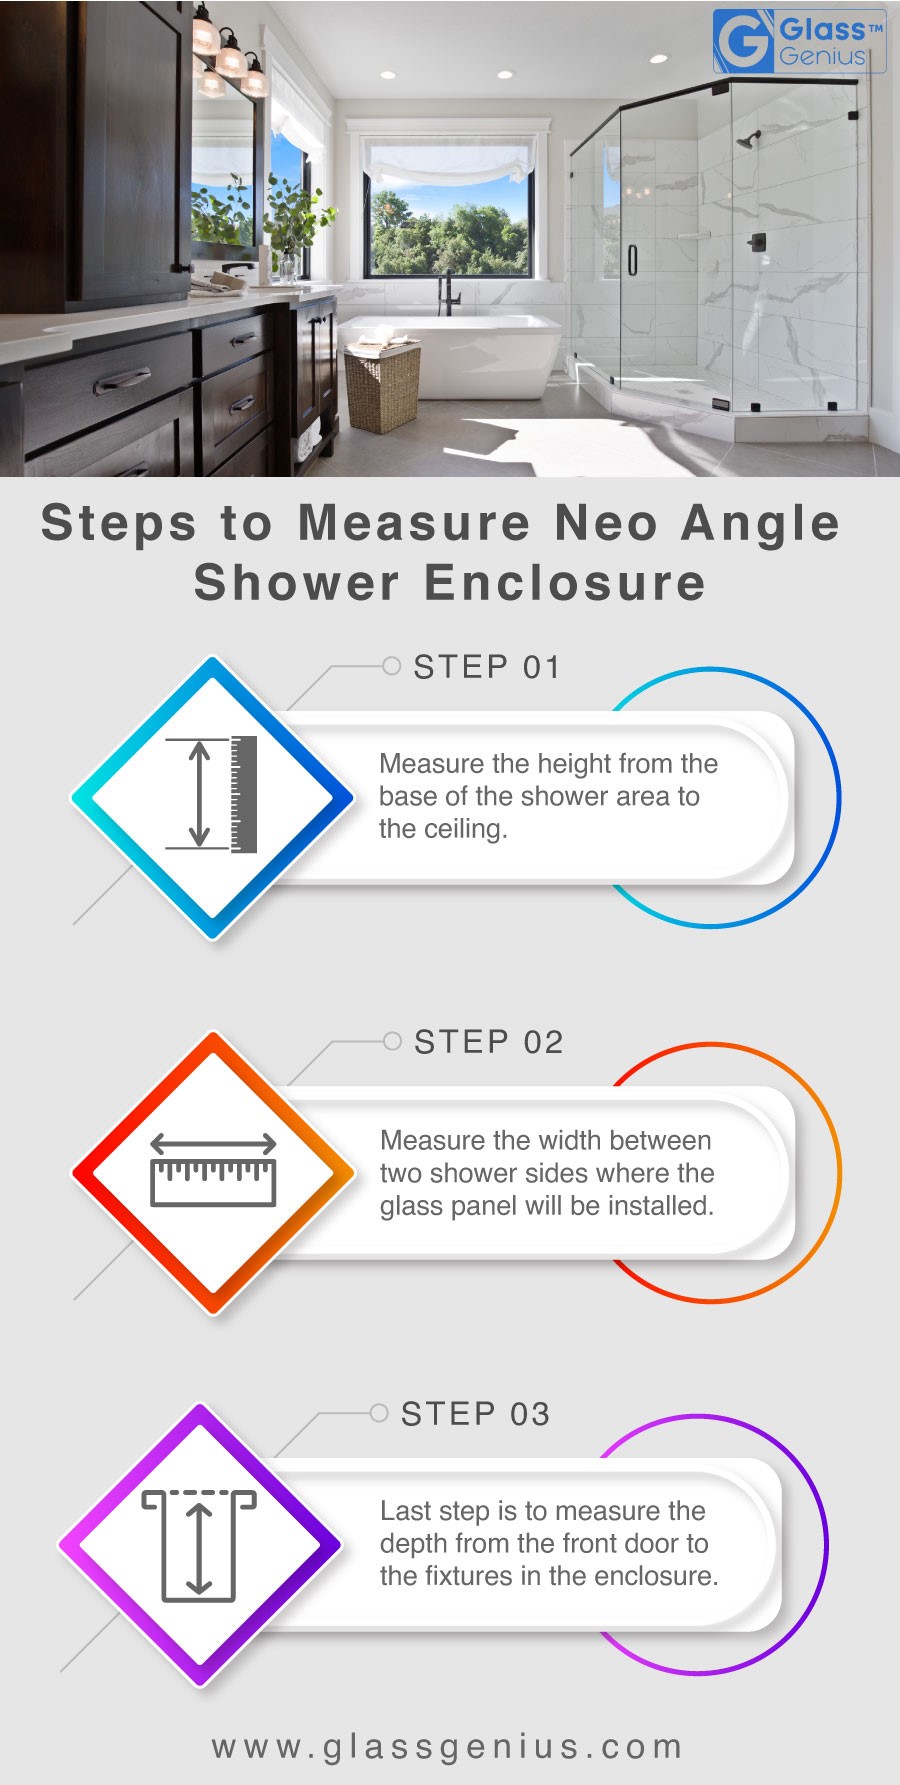 Steps to Measure Neo Angle Shower Enclosure